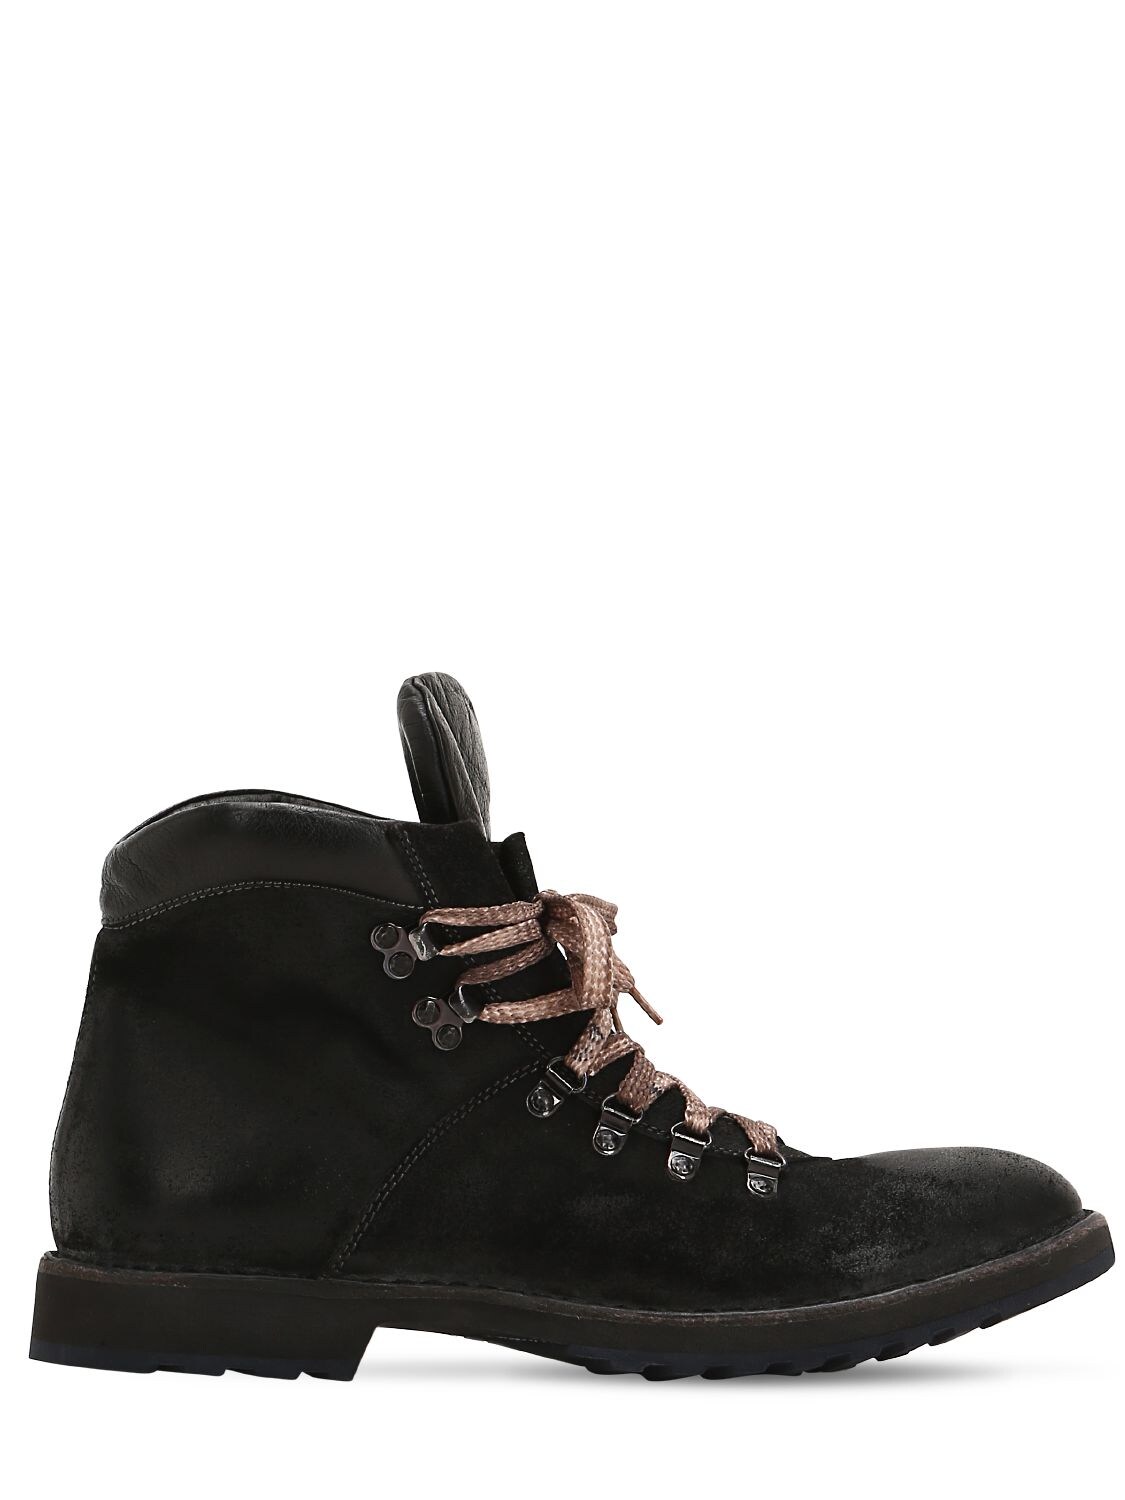 Moma Reversed Leather Hiking Boots In Black